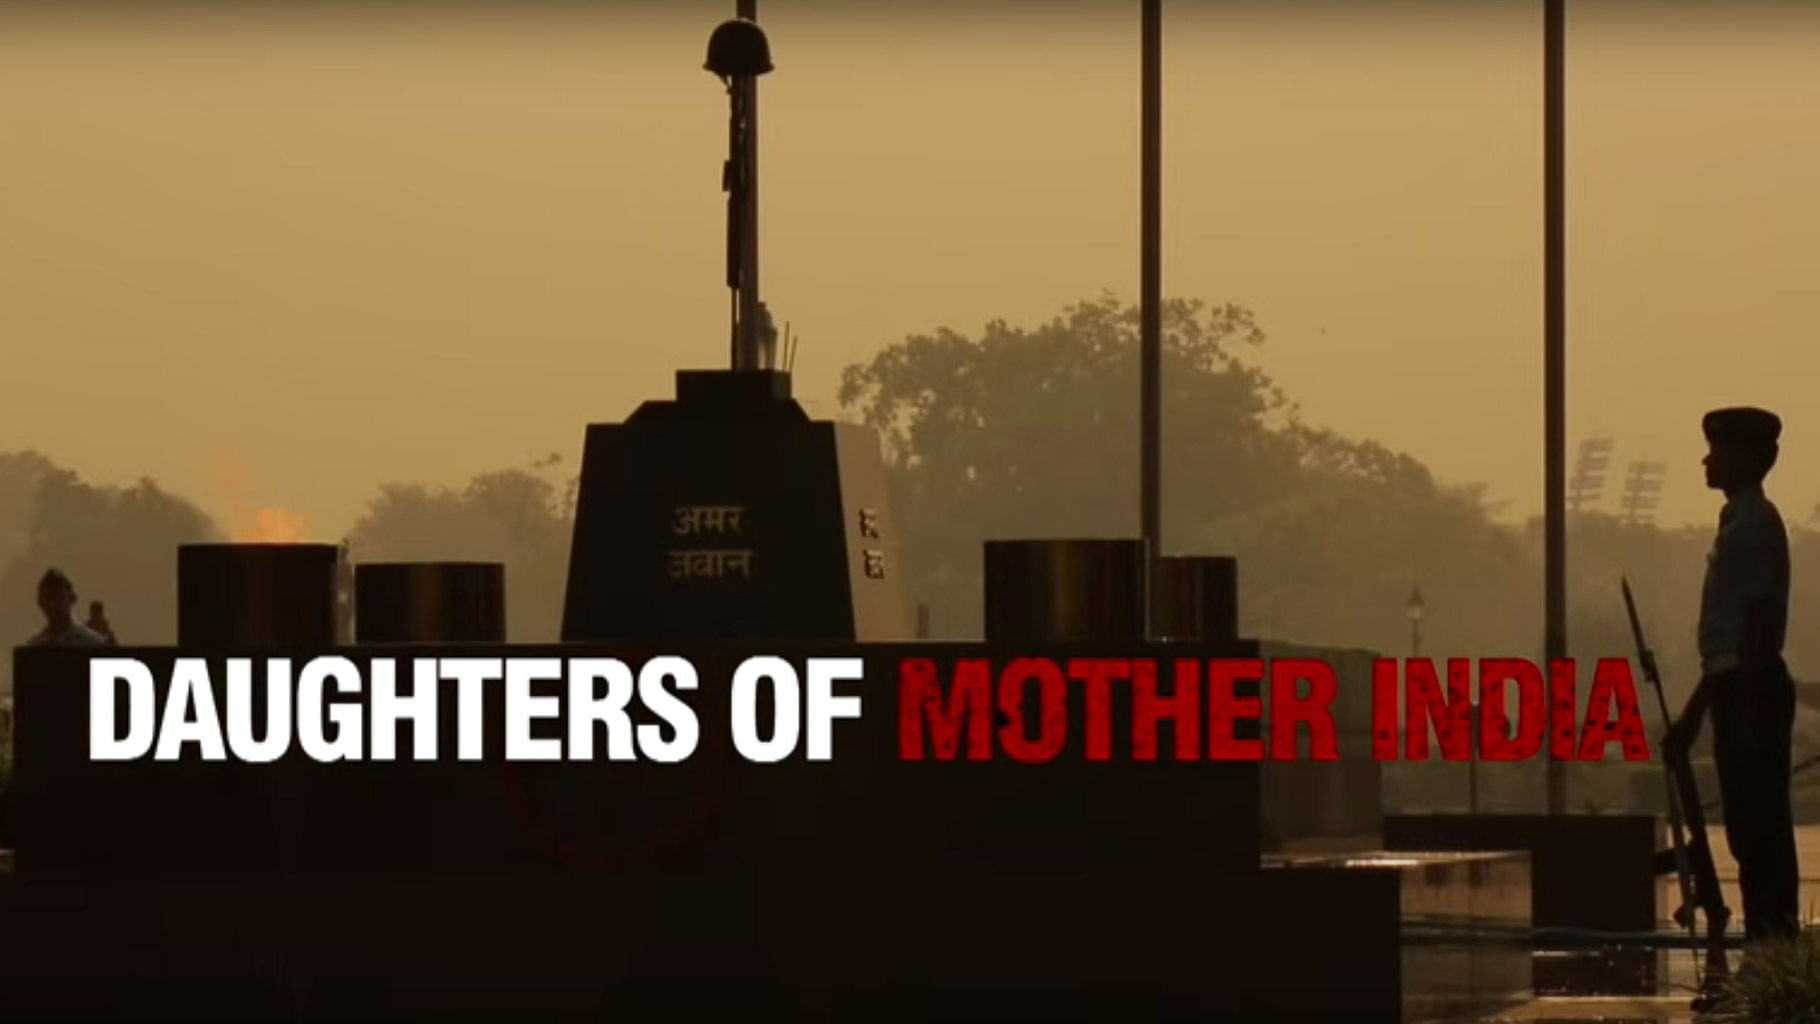 A screen-grab from the National Award winning documentary – Daughters of Mother India. (Photo Courtesy: YouTube/<a href="https://www.youtube.com/watch?v=fqiHEfyAXcM">Daughters of Mother India</a>)